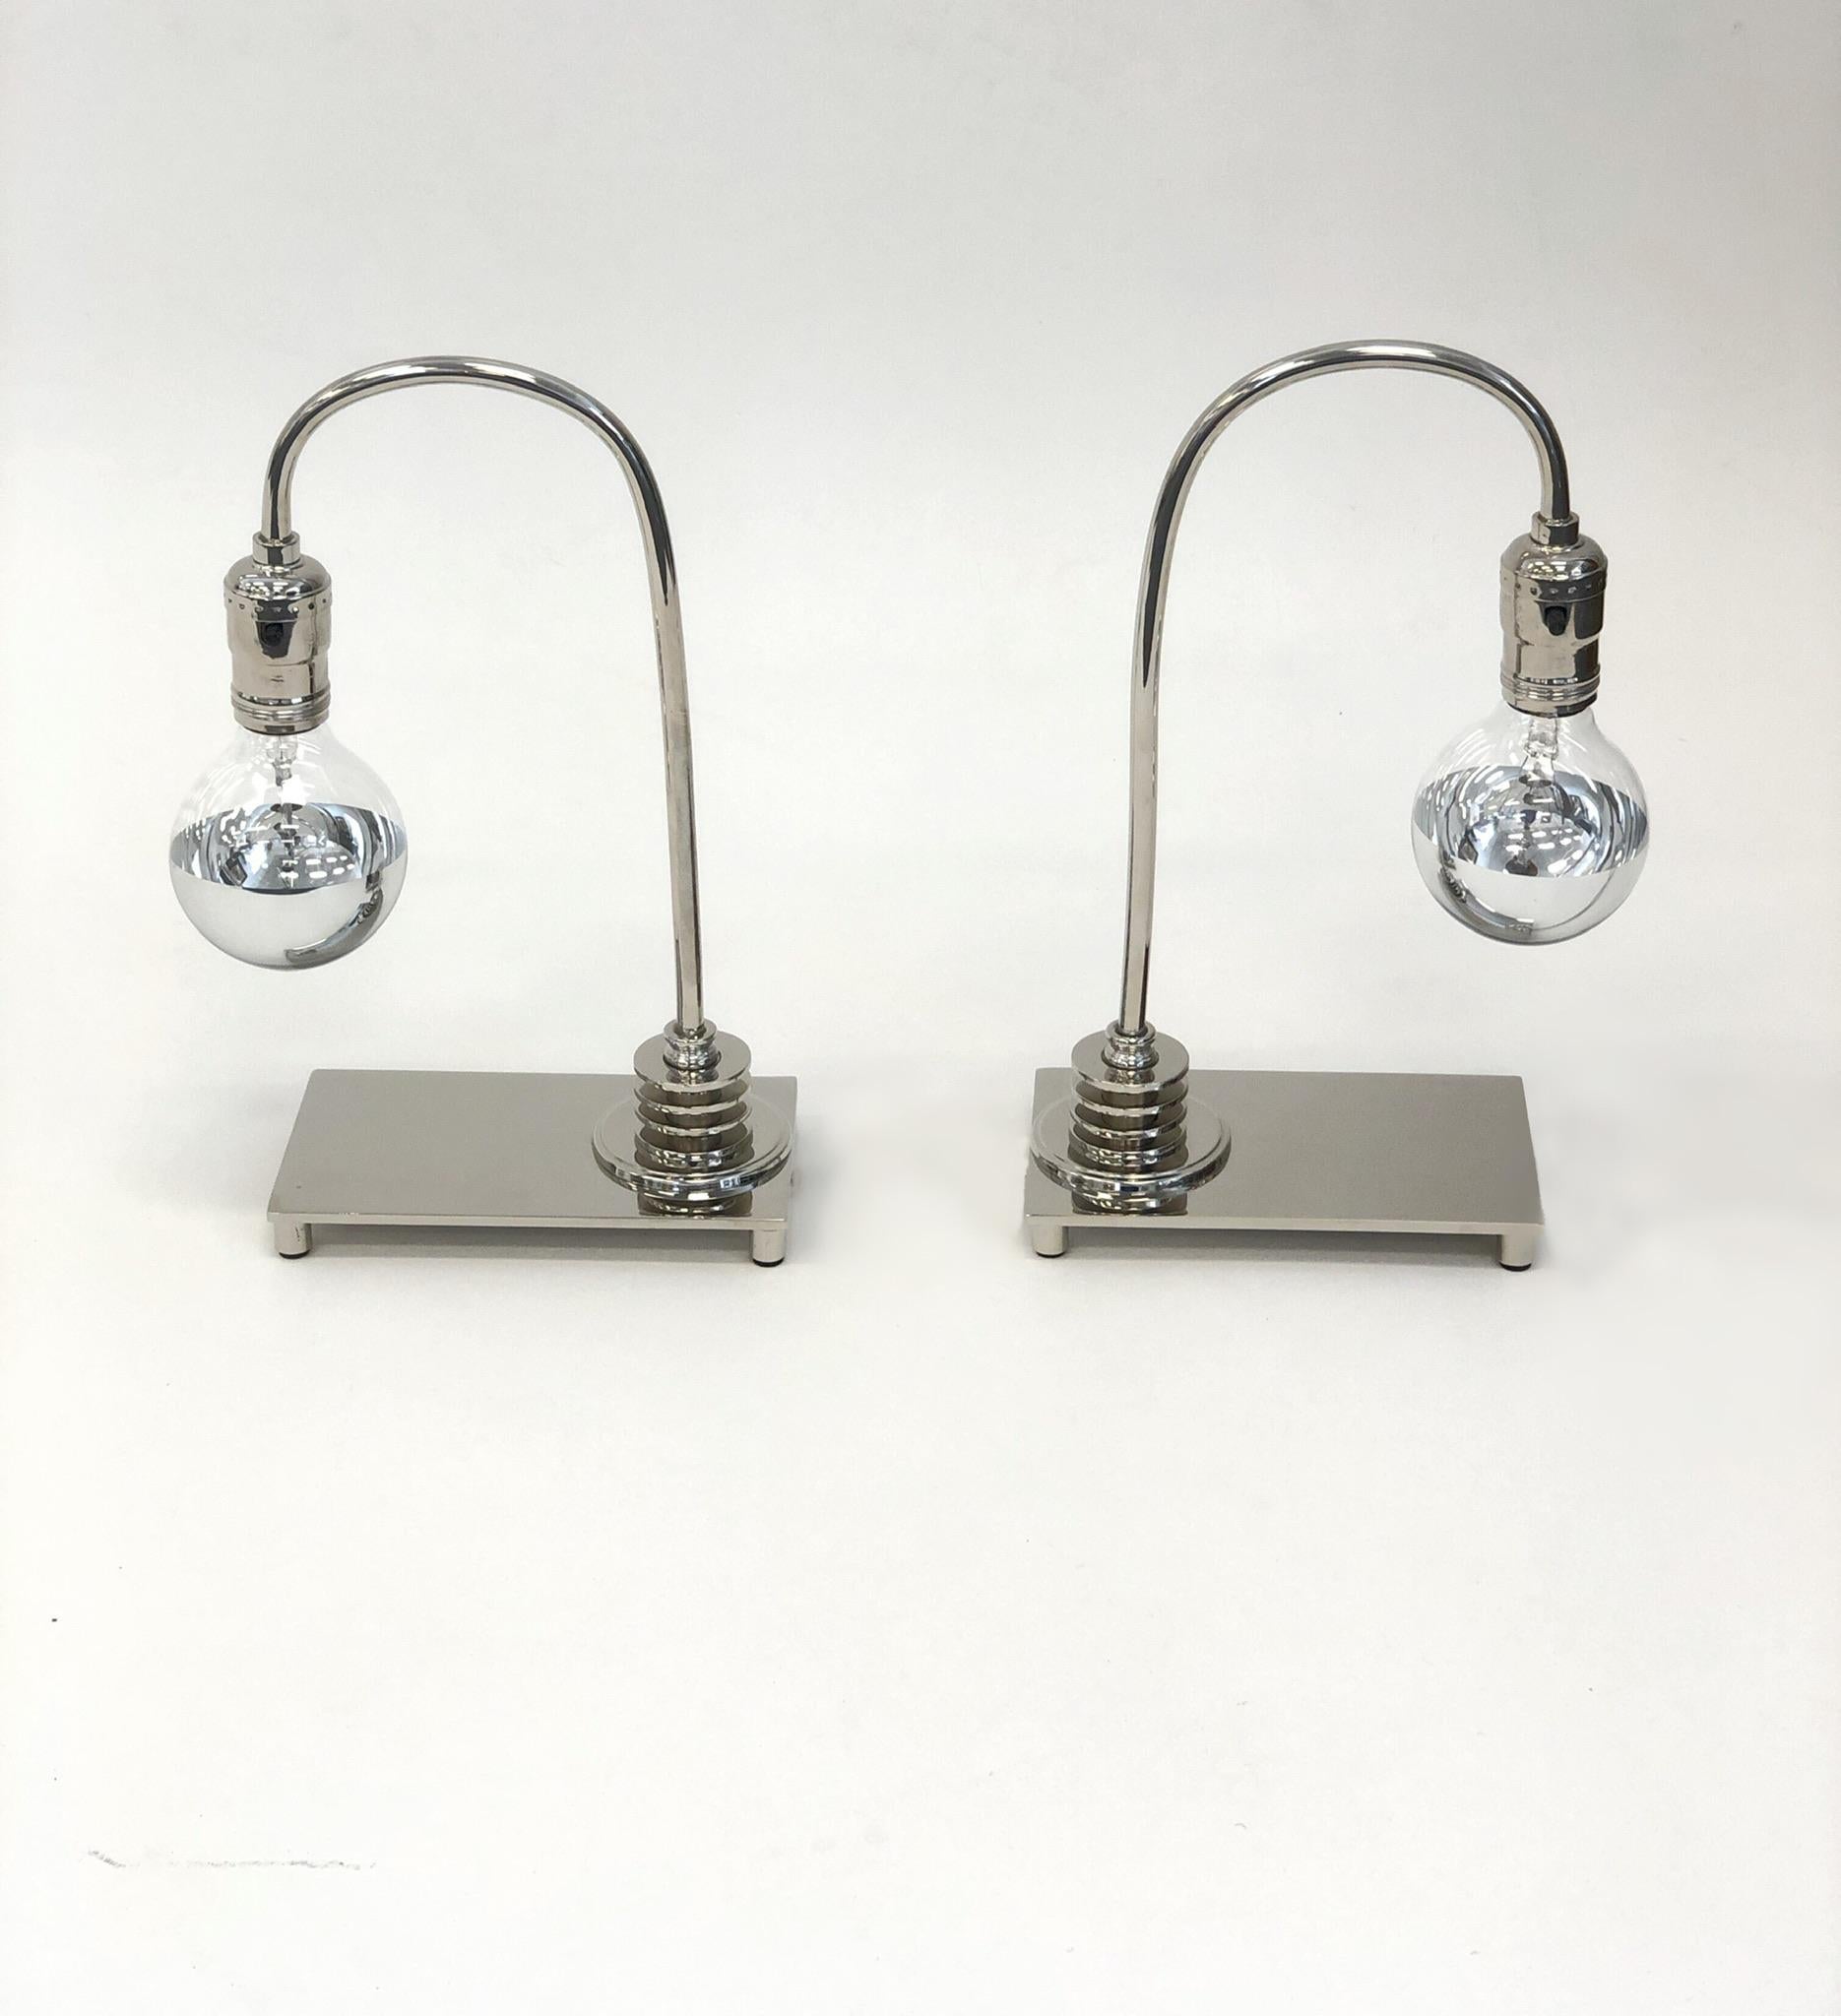 A beautiful pair of polish nickel Art Deco table lamps. The lamps have been newly nickel-plated and rewired. The light bulbs are half chrome dipped bulbs.
Dimension: 12.25” high, 8” wide, 4” deep.